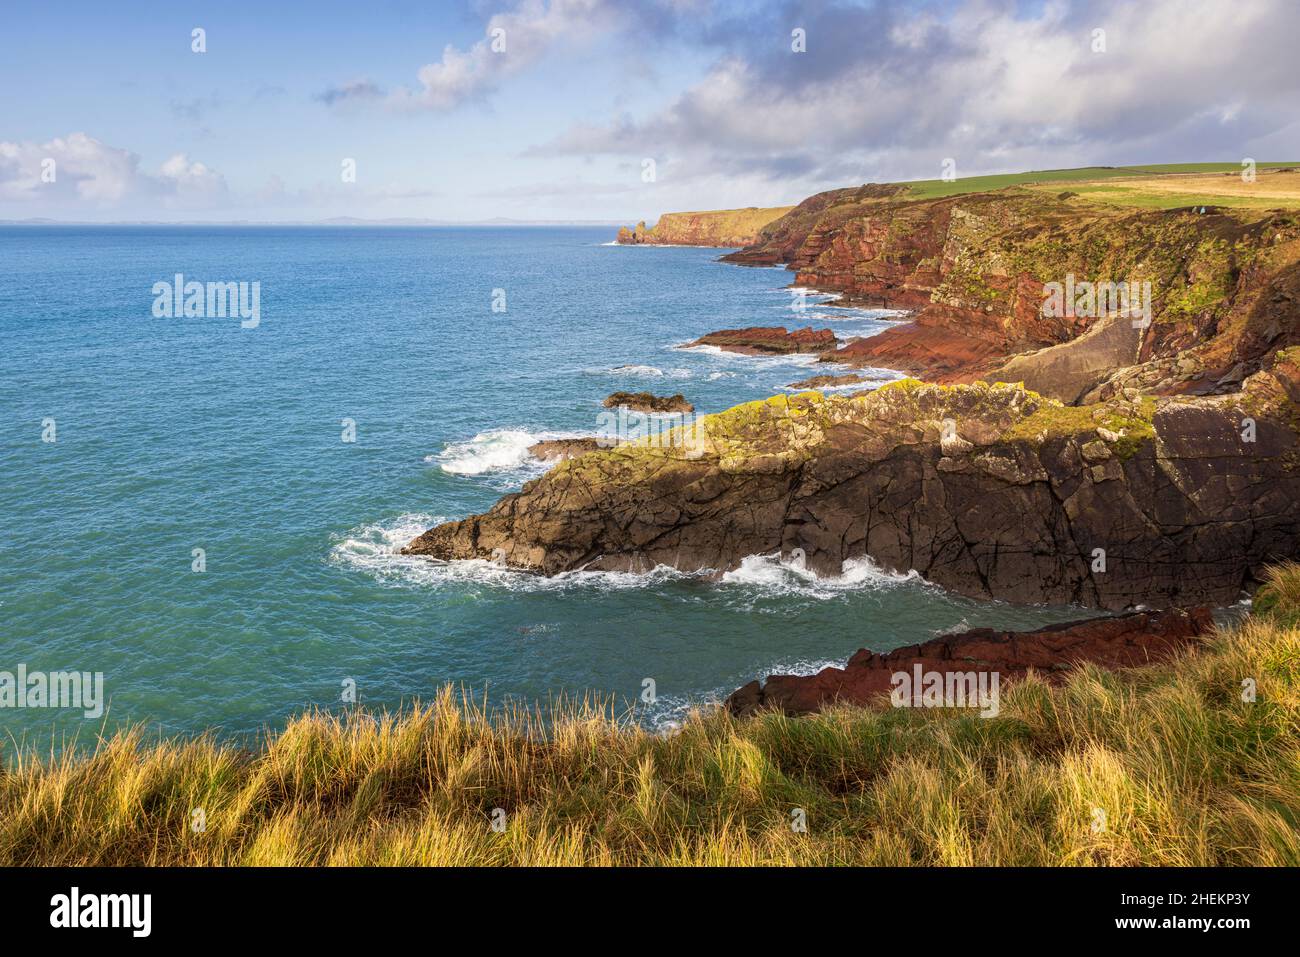 The sandstone cliffs of St Brides Bay in the Pembrokeshire Coast National Park, South Wales Stock Photo